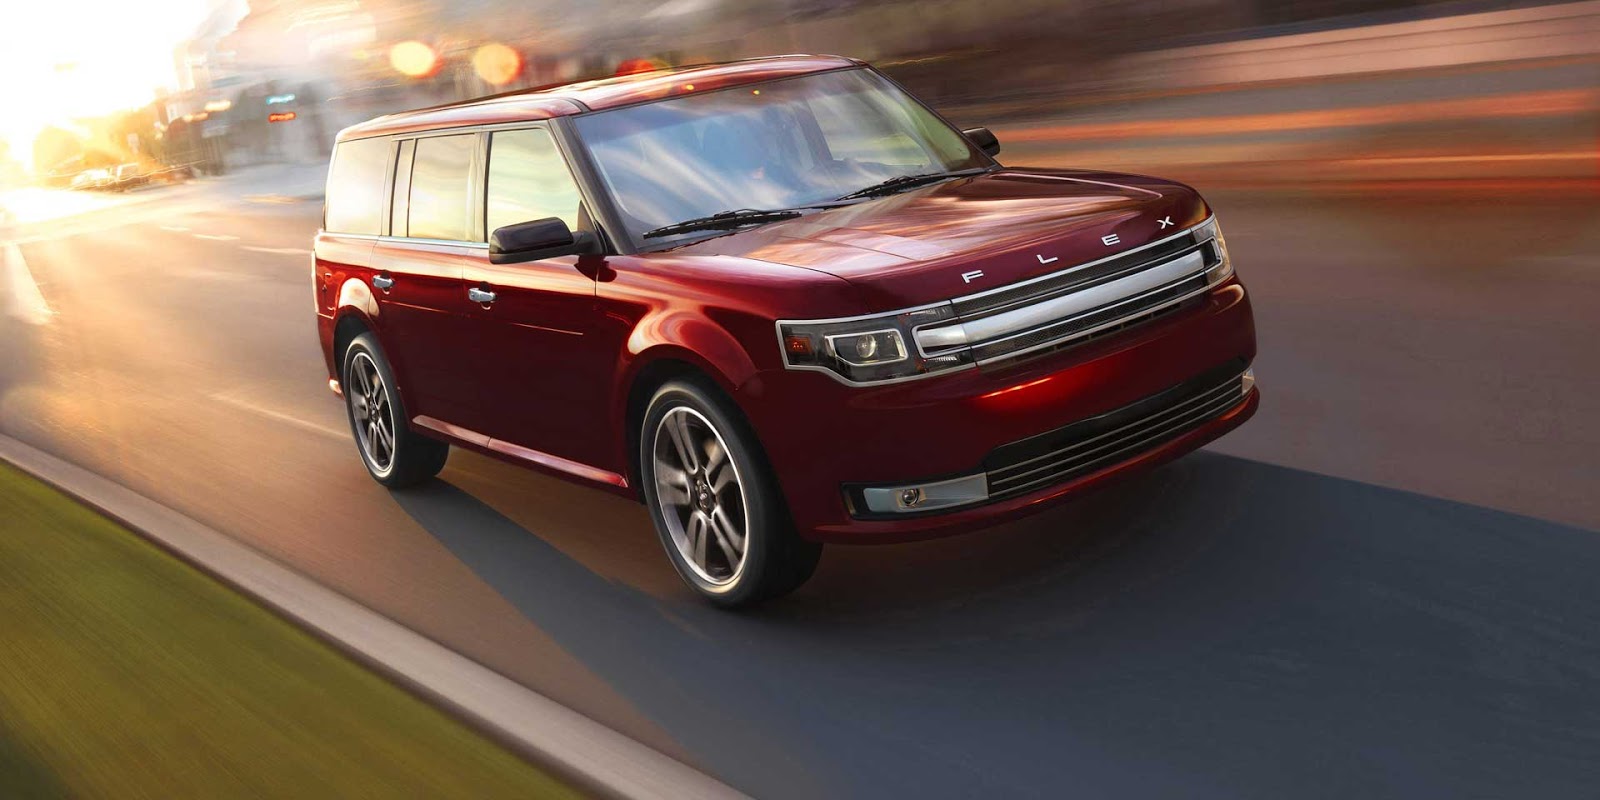 The 2016 Ford Flex Crossover Hd Image is a engine power by 3.5L Ti-VCT V6 3...